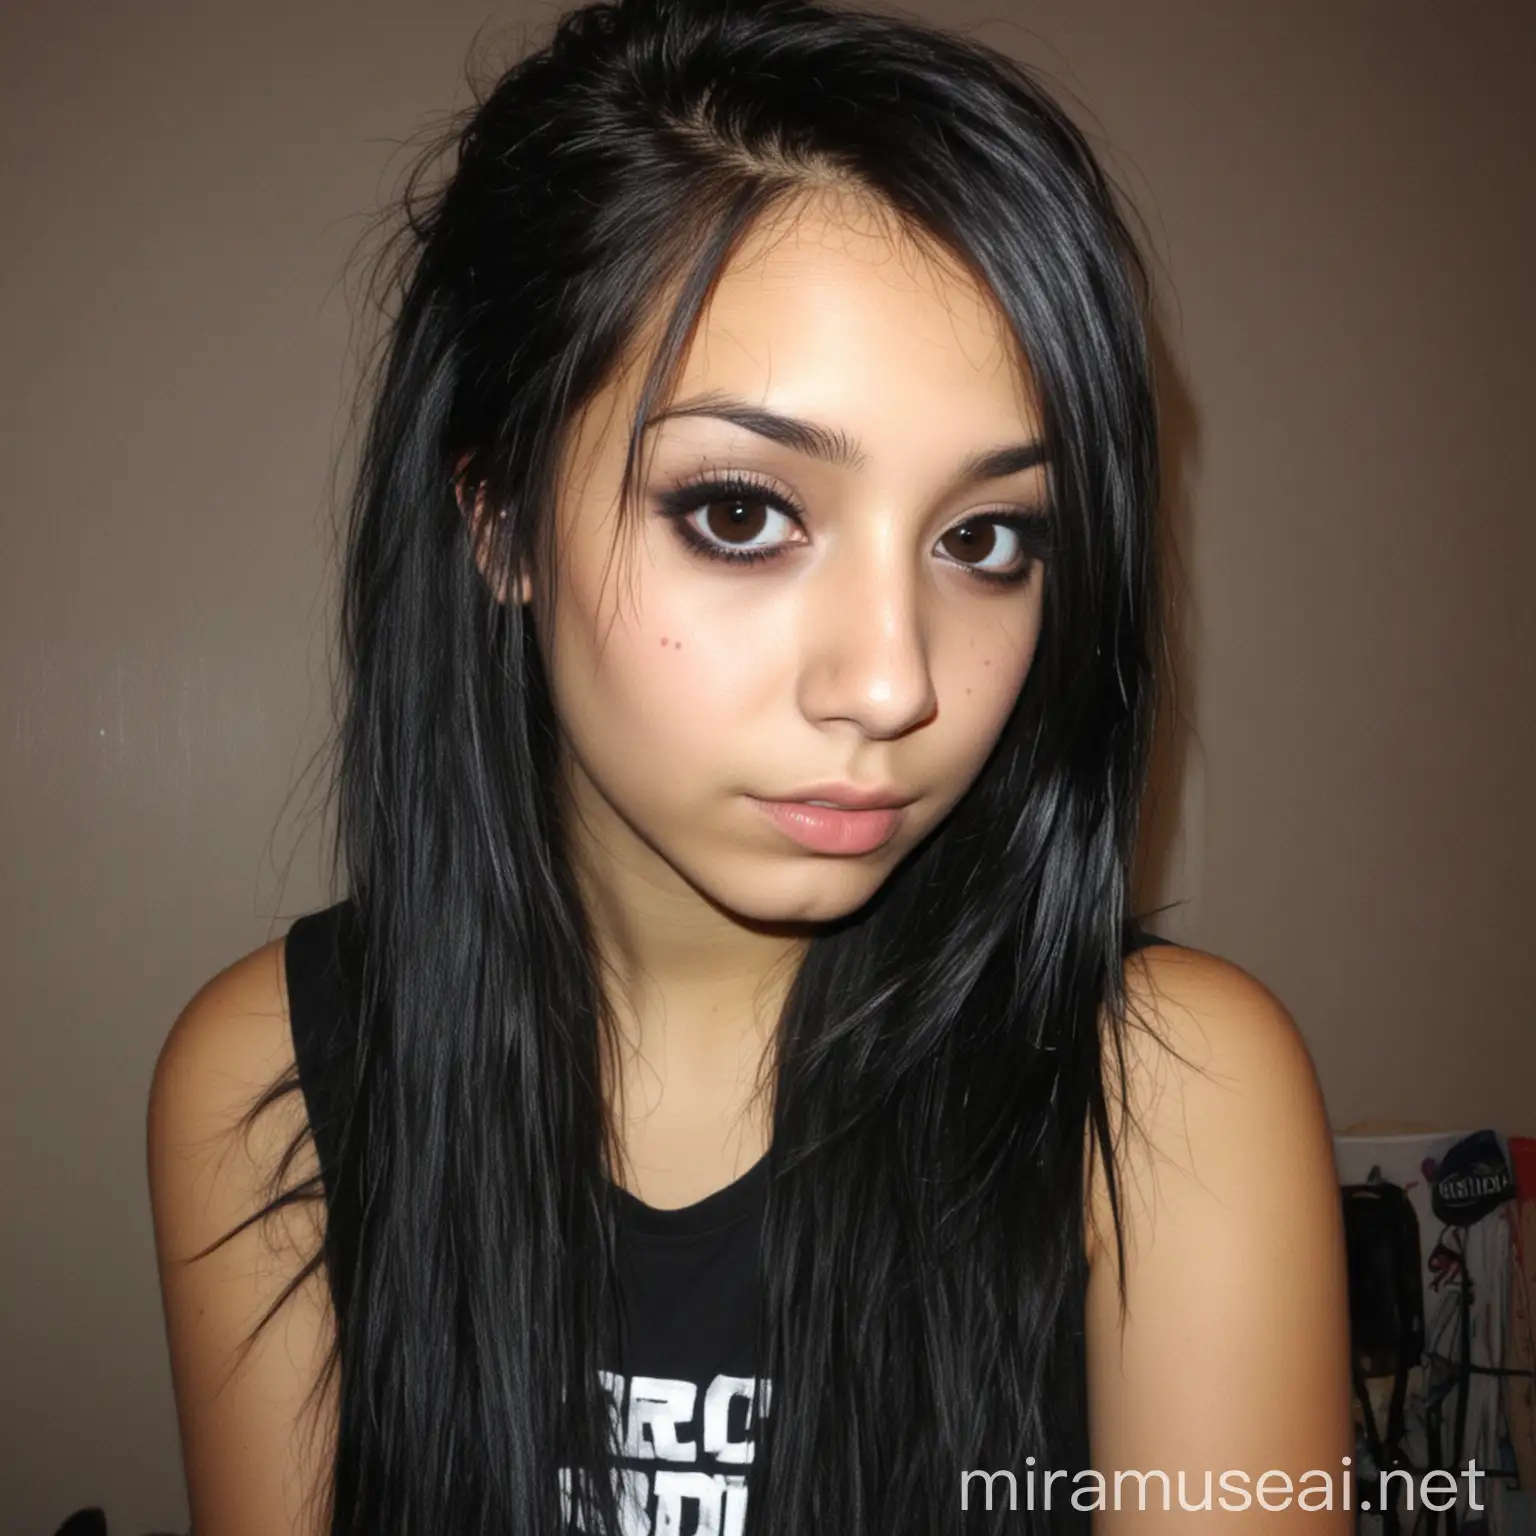 Latina Girl with Emo Style and Long Hair